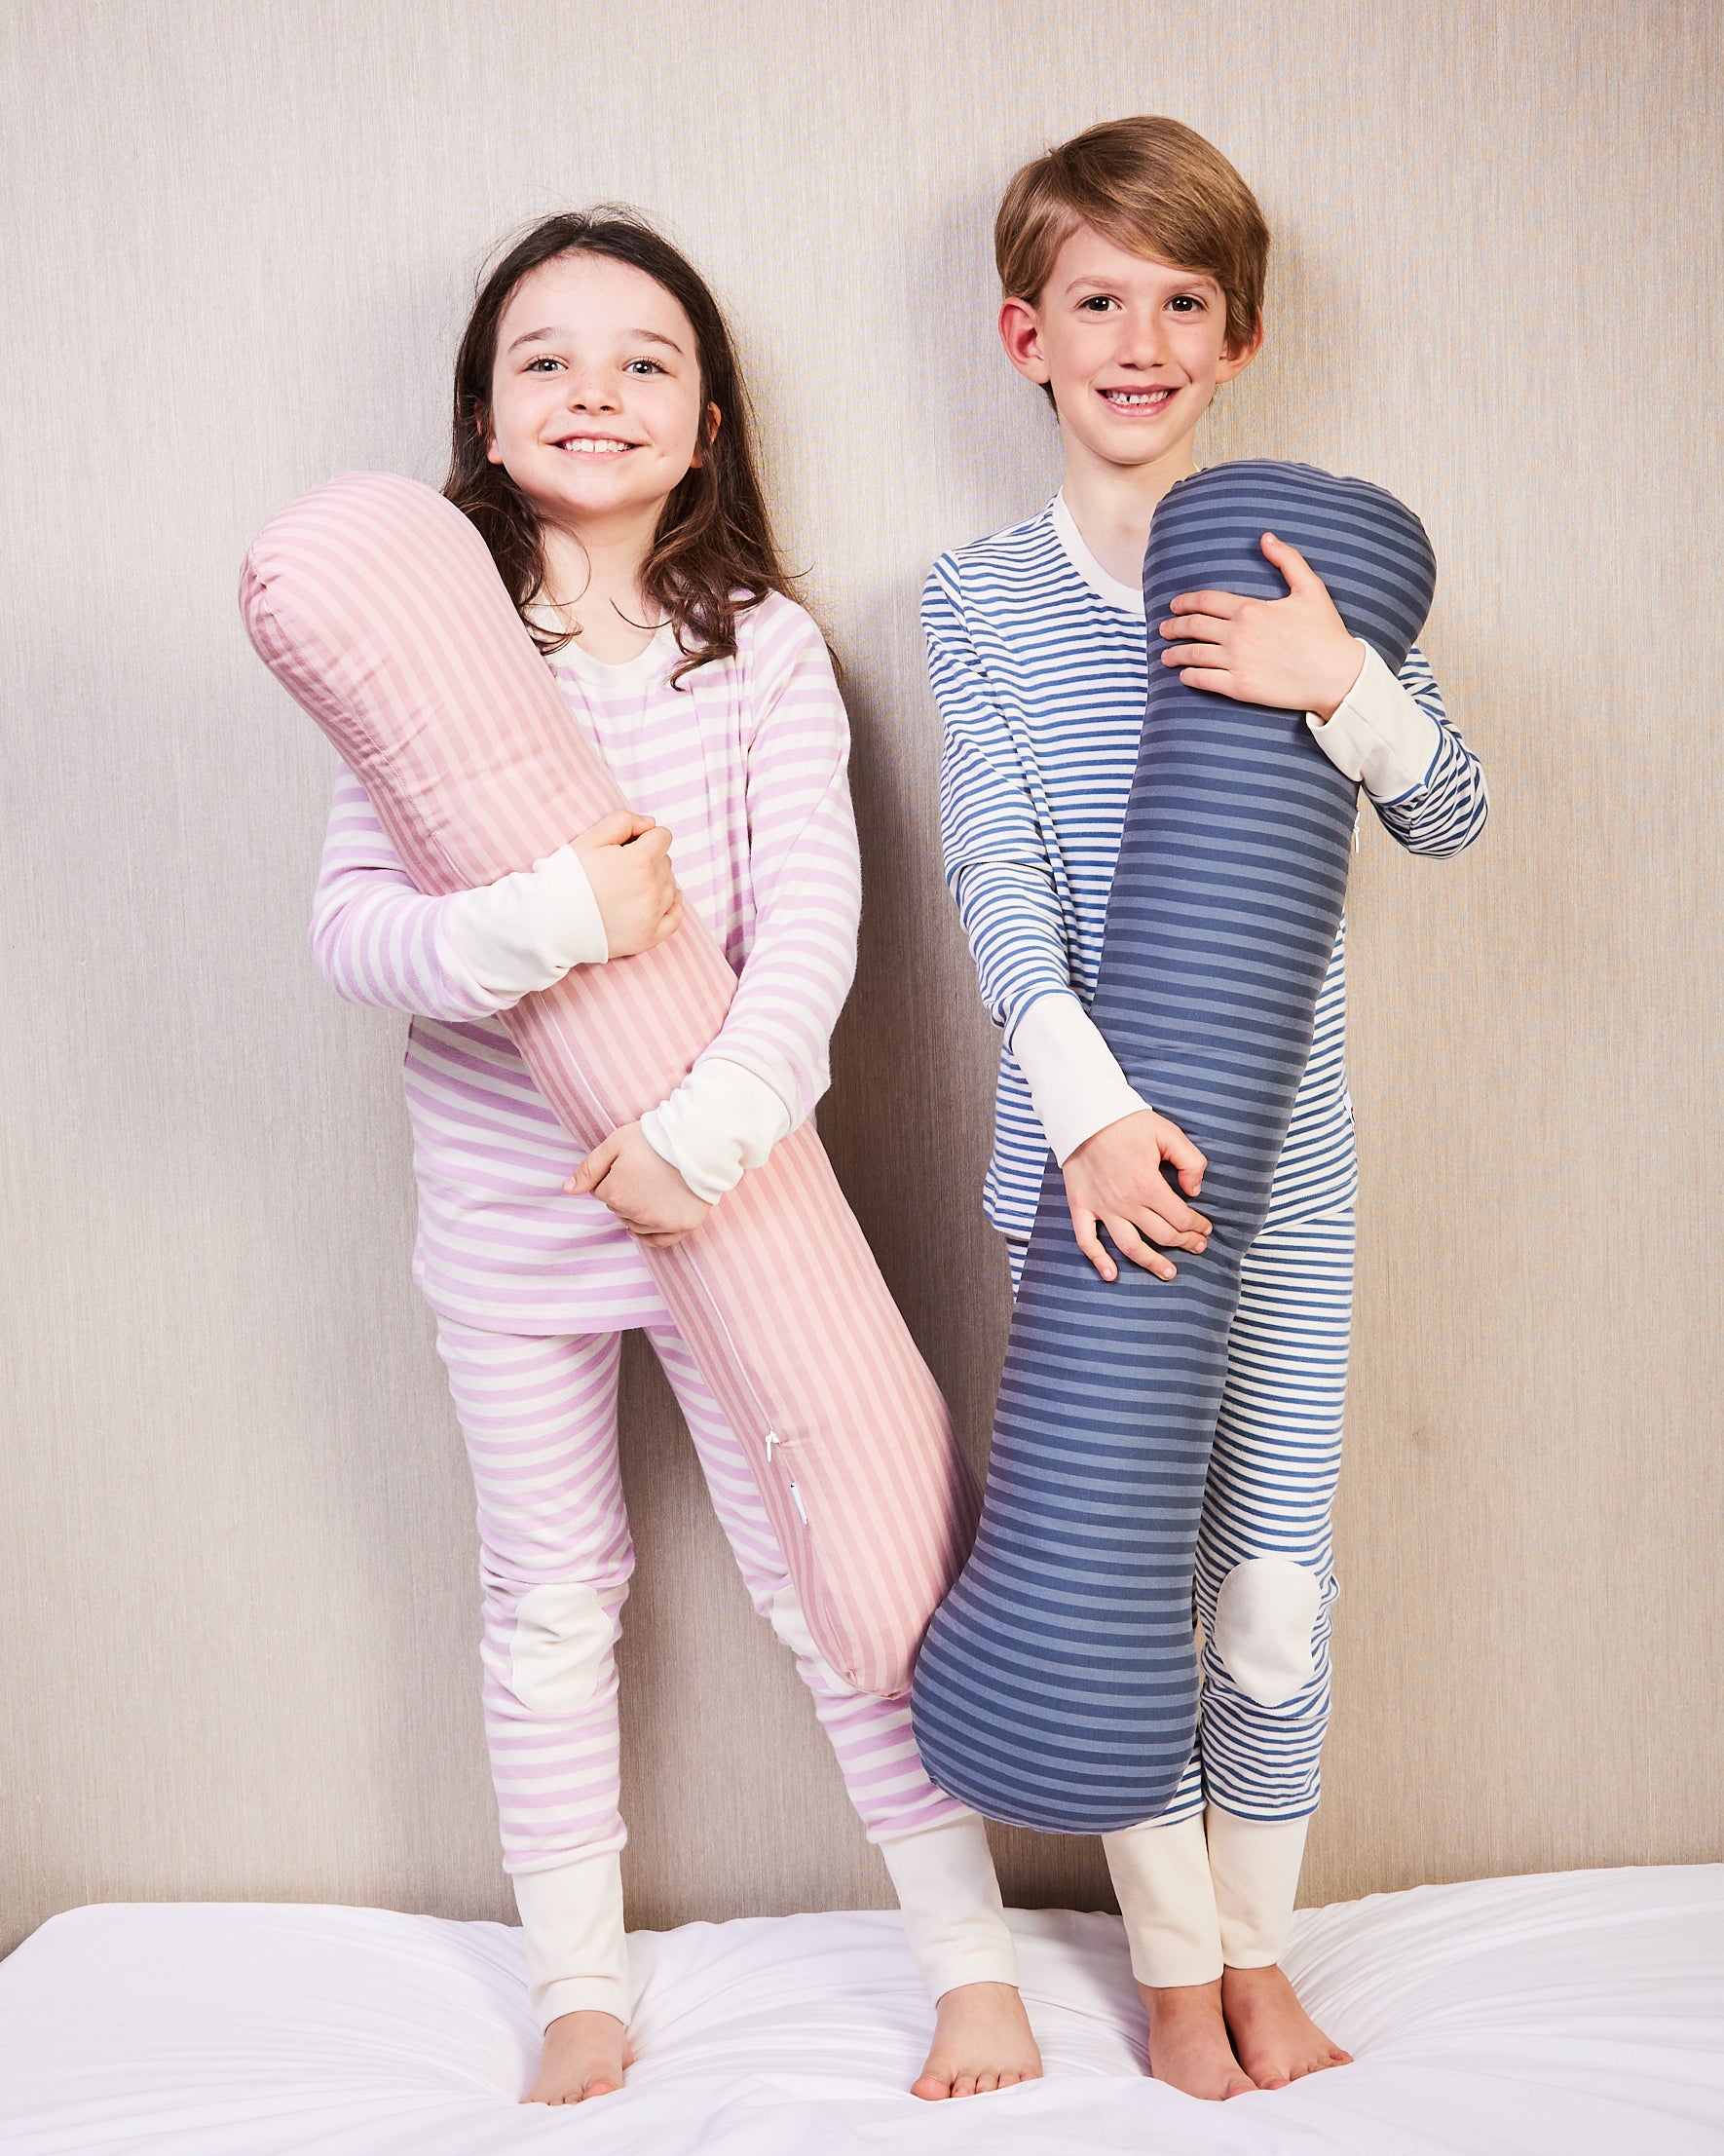 Kids happy with their weighted pillow